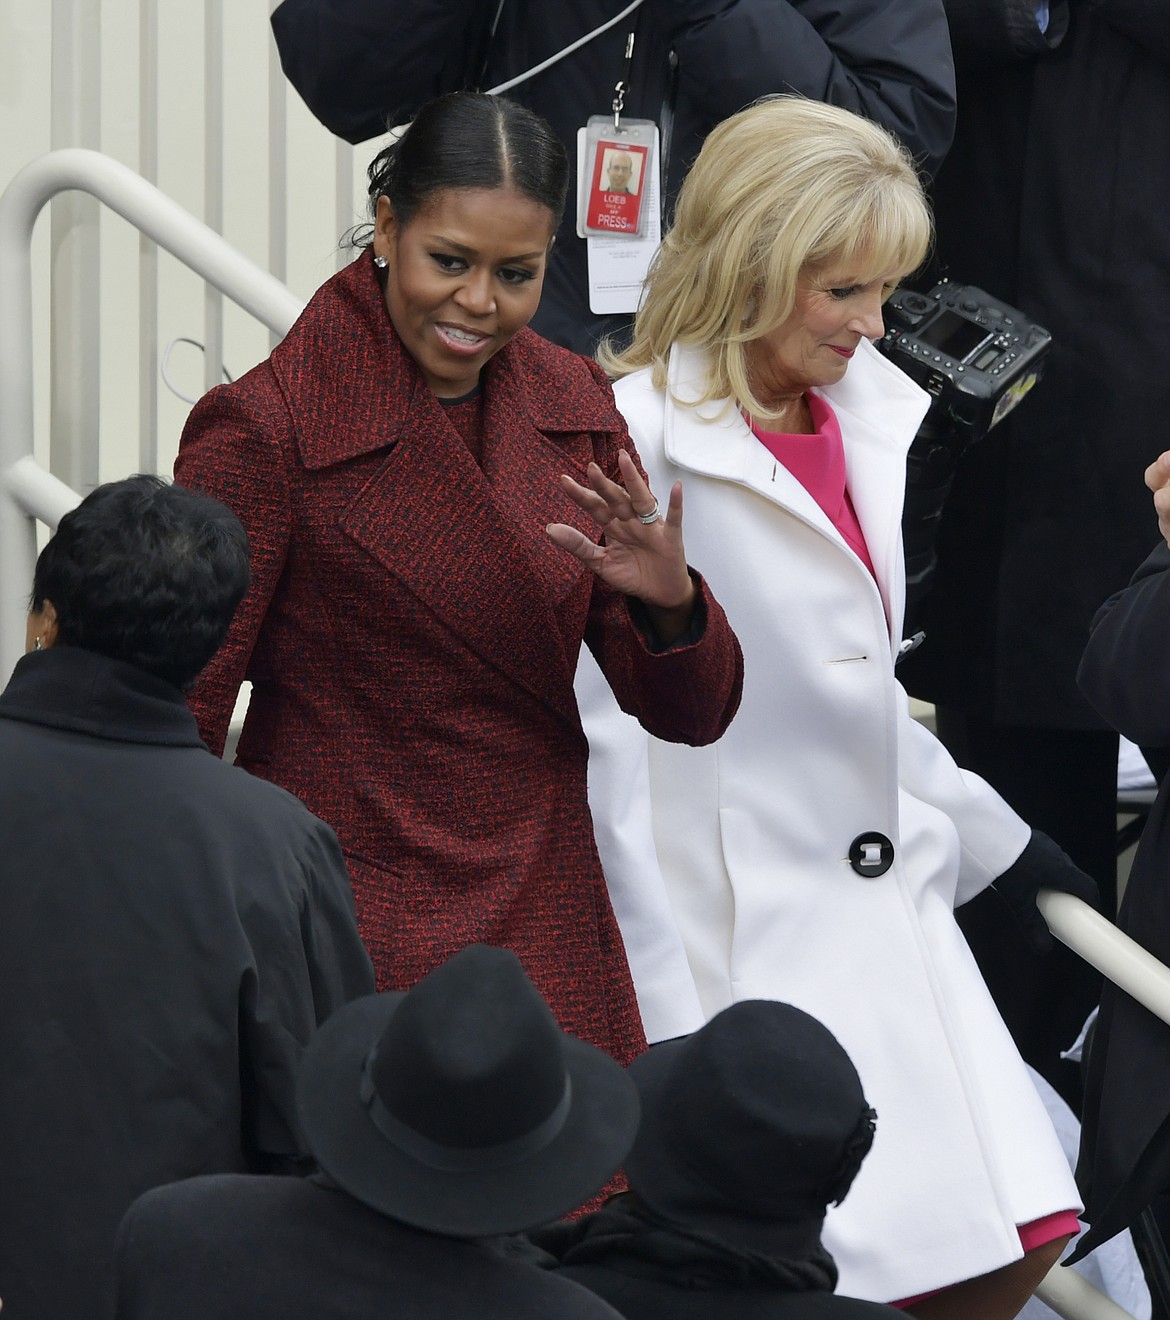 First Lady Michelle Obama, left, arrives with Vice President Joe Biden's wife, Dr. Jill Biden for the 58th Presidential Inauguration for President-elect Donald Trump at the U.S. Capitol in Washington, Friday, Jan. 20, 2017.(AP Photo/Susan Walsh)